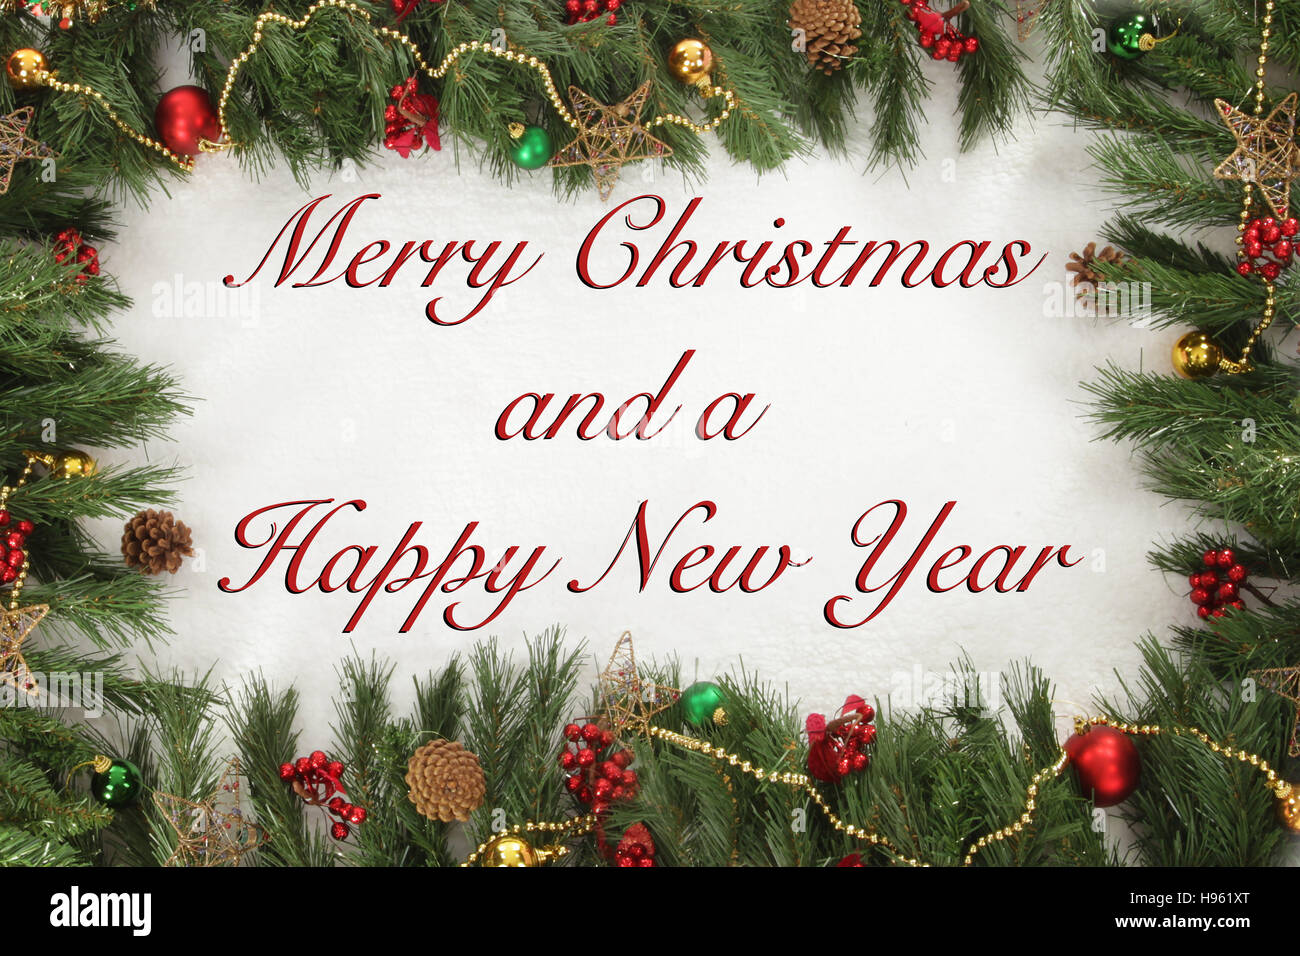 Merry Christmas and a happy new year sign Stock Photo